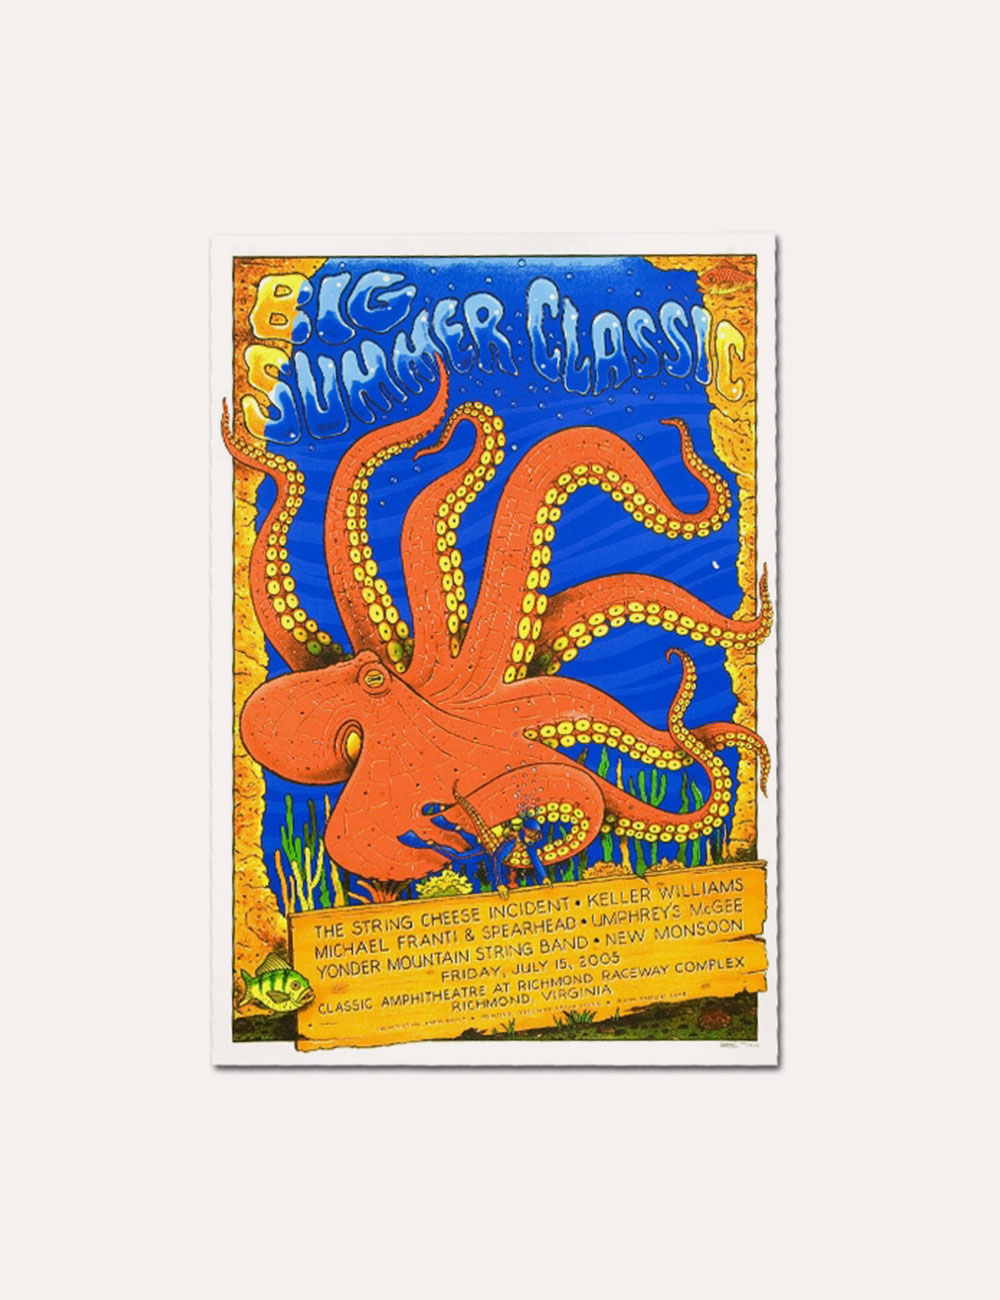 The String Cheese Incident - Merch - Poster - 2005 BIG Octopus Richmond ROSSIT/DCS Poster